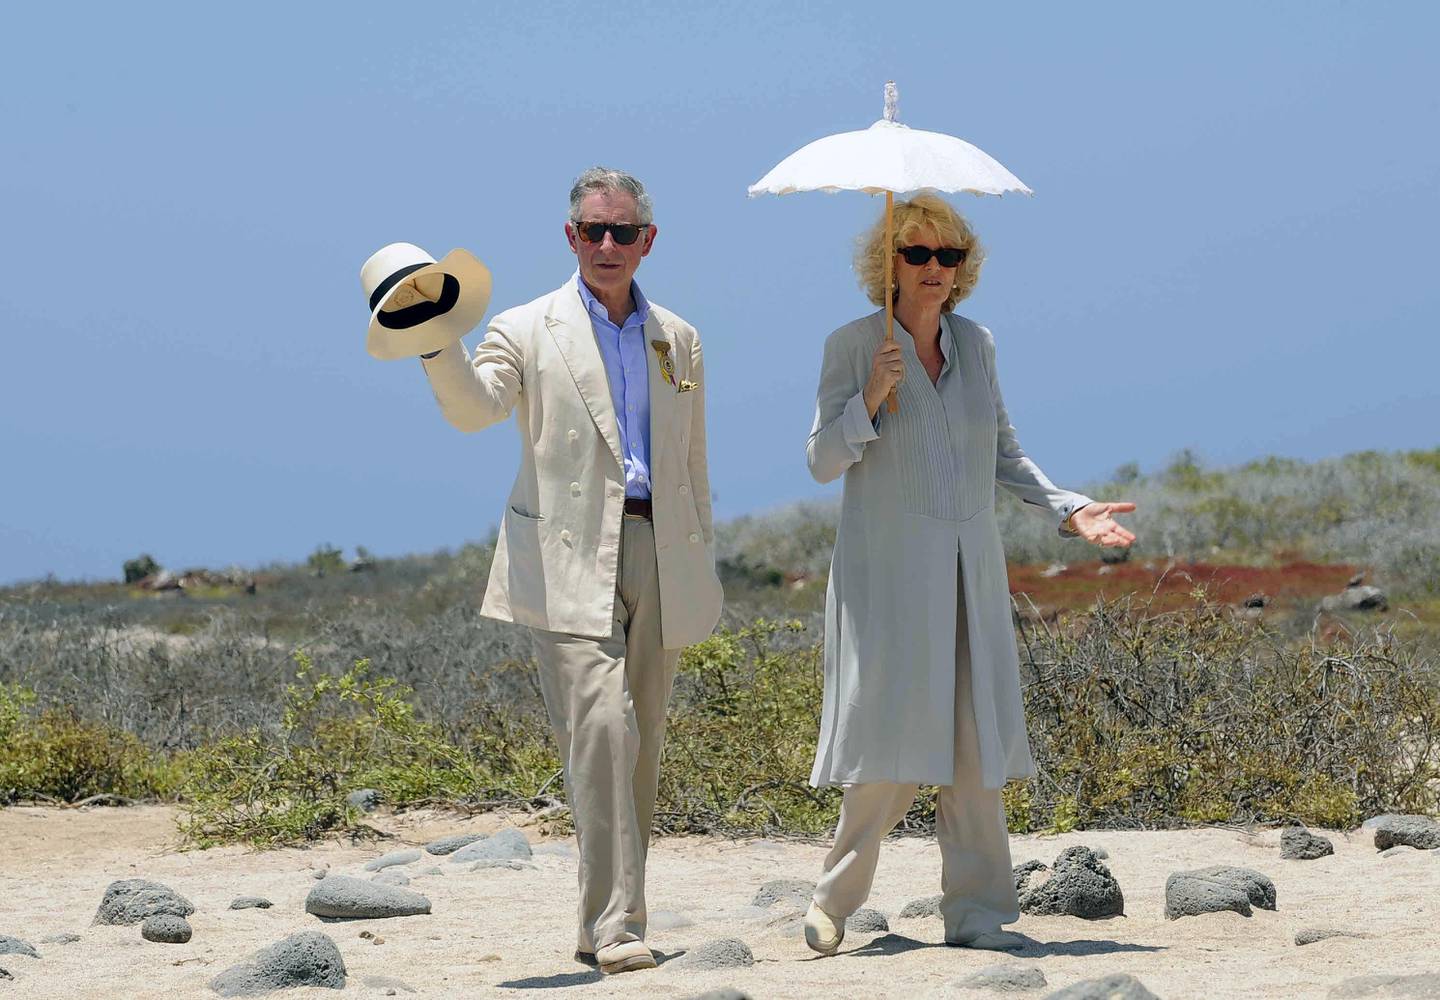 (FILES) In this file photo taken on March 17, 2009 Britain's Prince Charles (L) walks with his wife Camilla Parker Bowles, Duchess of Cornwall, during a visit to Seymour island on March 17, 2009. - Britain's Prince Charles turns 70 on November 14, 2018 as busy as ever, having spent a lifetime forging his own path during his record wait for the throne. (Photo by Rodrigo BUENDIA / AFP)